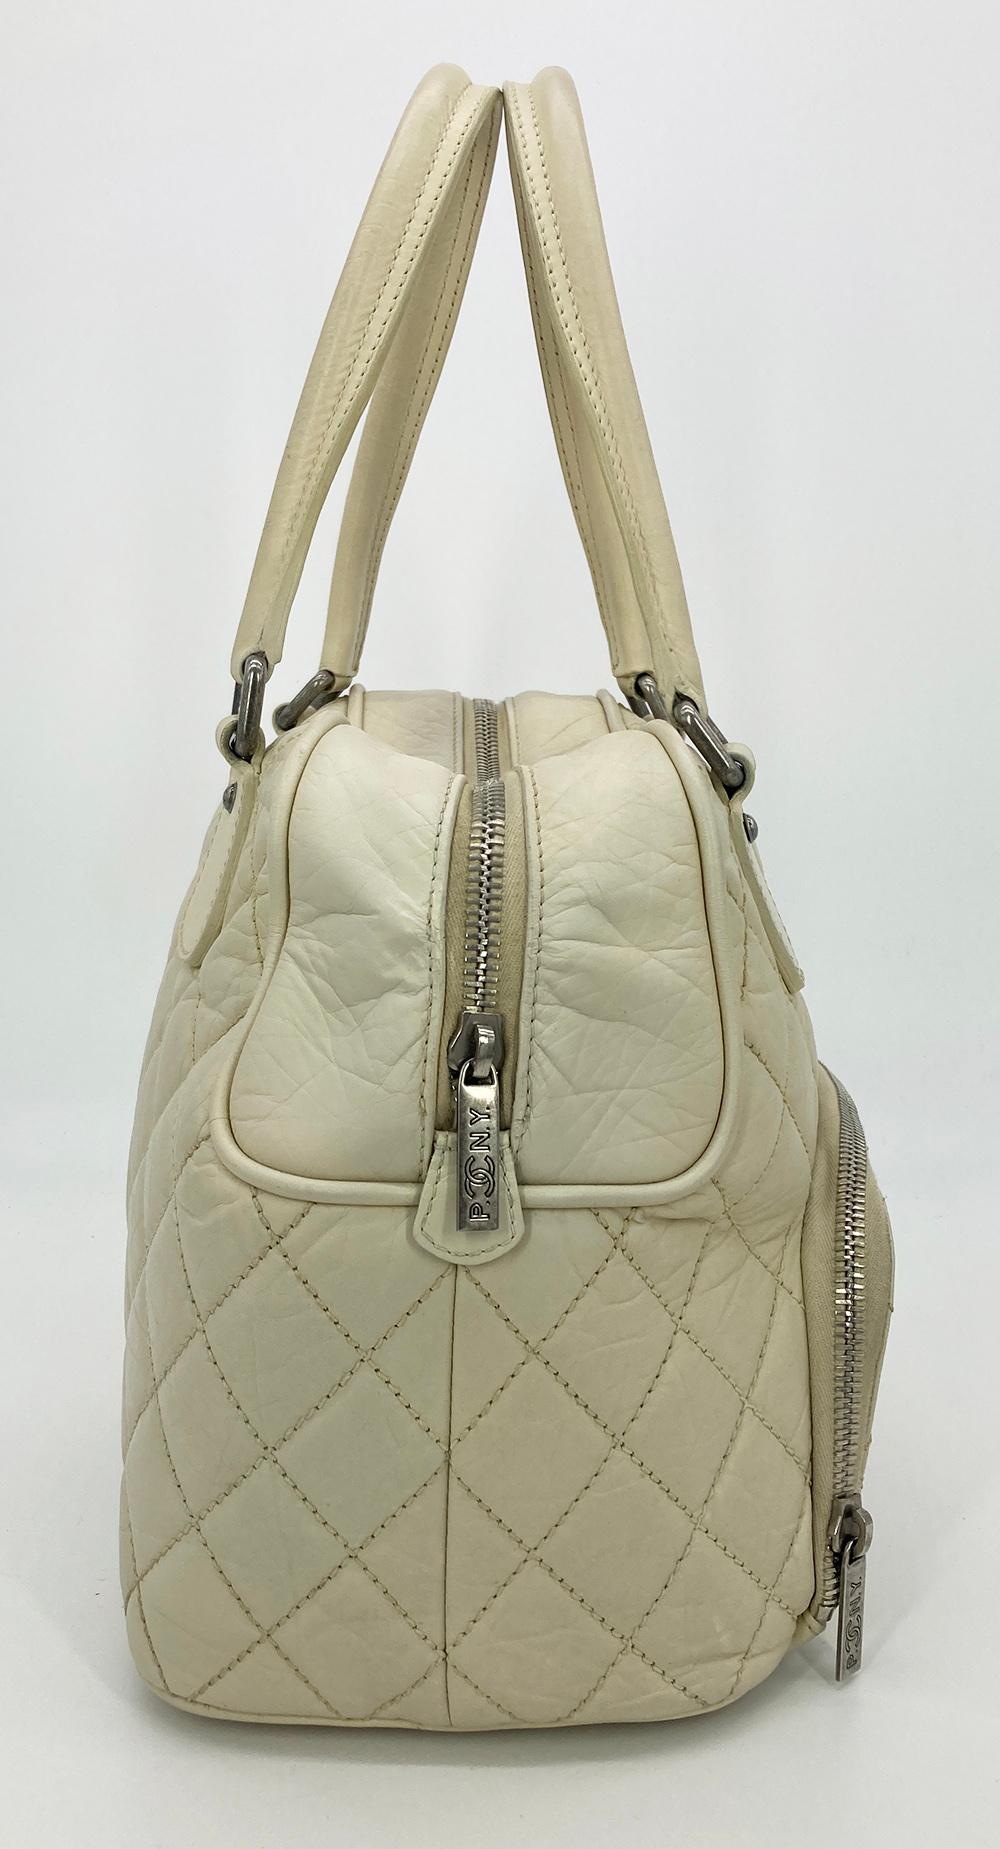 Chanel Paris New York Cream Distressed Bowling Tote in very good condition. Clean corners and edges. one stain inside on bottom lining and some wear on lining around ends of zipper inside. see photos. otherwise excellent condition. unique and rare